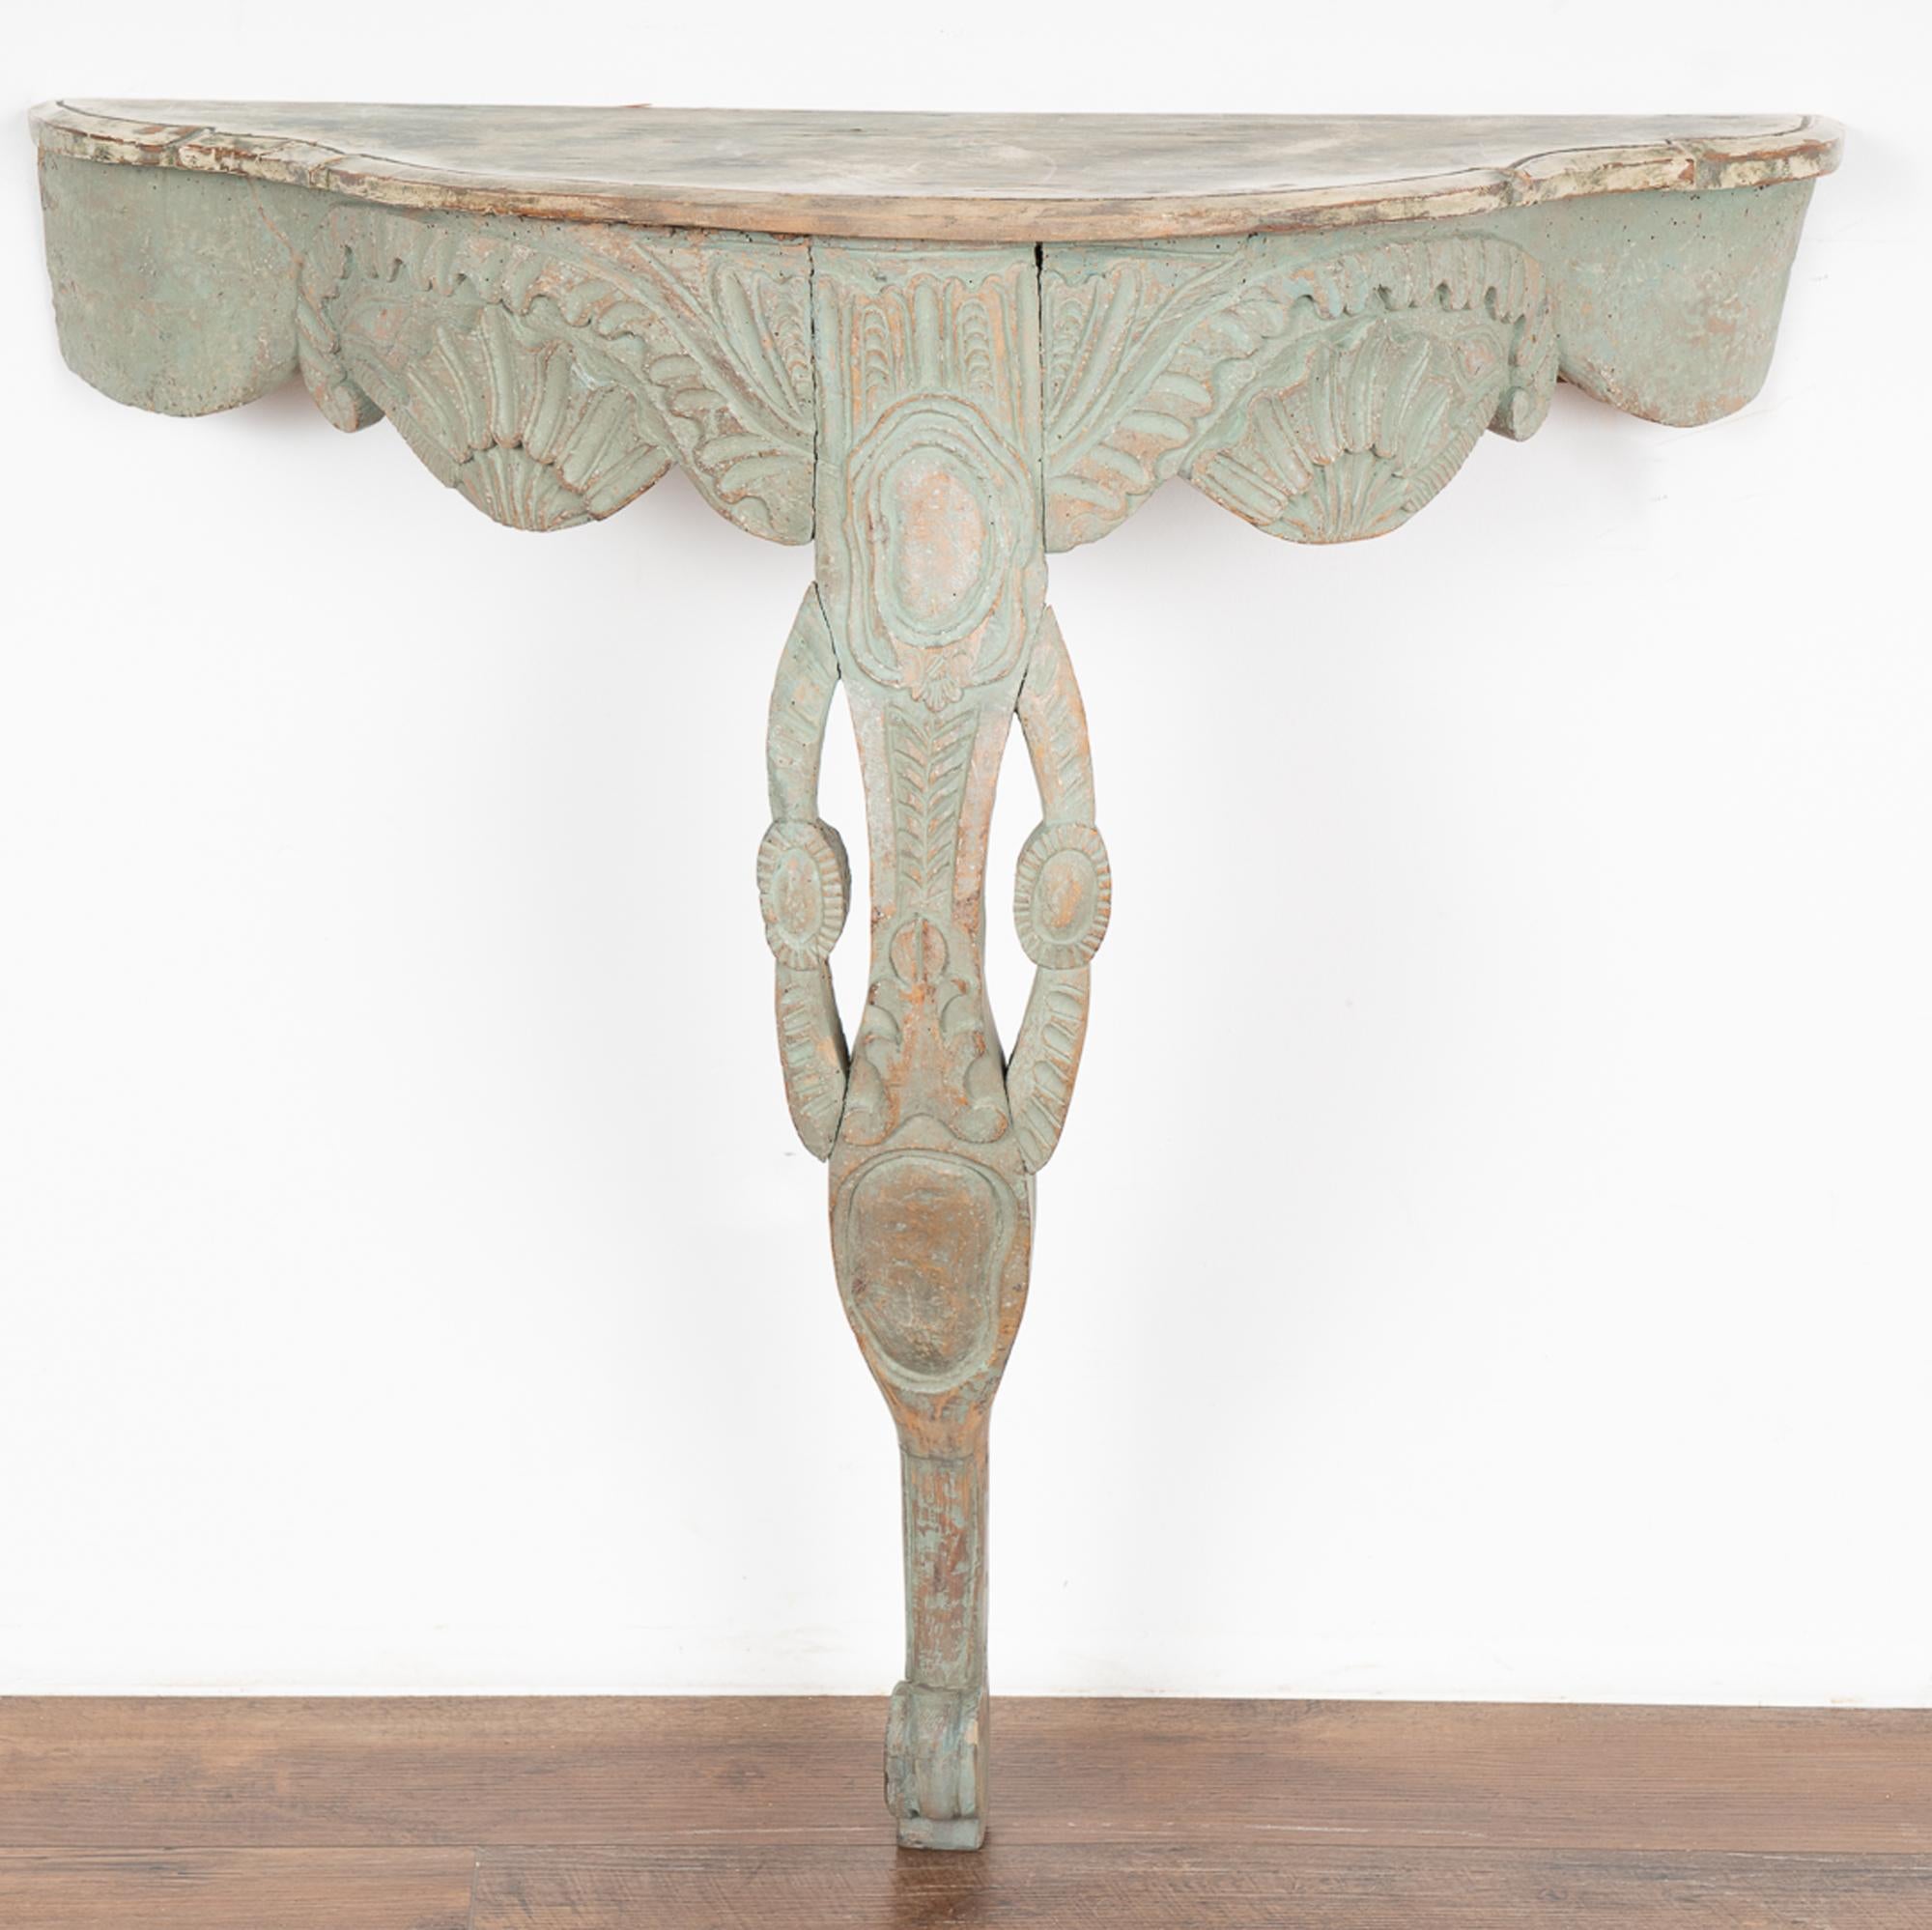 This lovely Norwegian console table has an elaborate hand carved skirt and curvaceous carved single leg.
Note the exquisite aqua color, a soft shade of muted greens (with slight blue undertones) that compliment the romantic appeal of this small